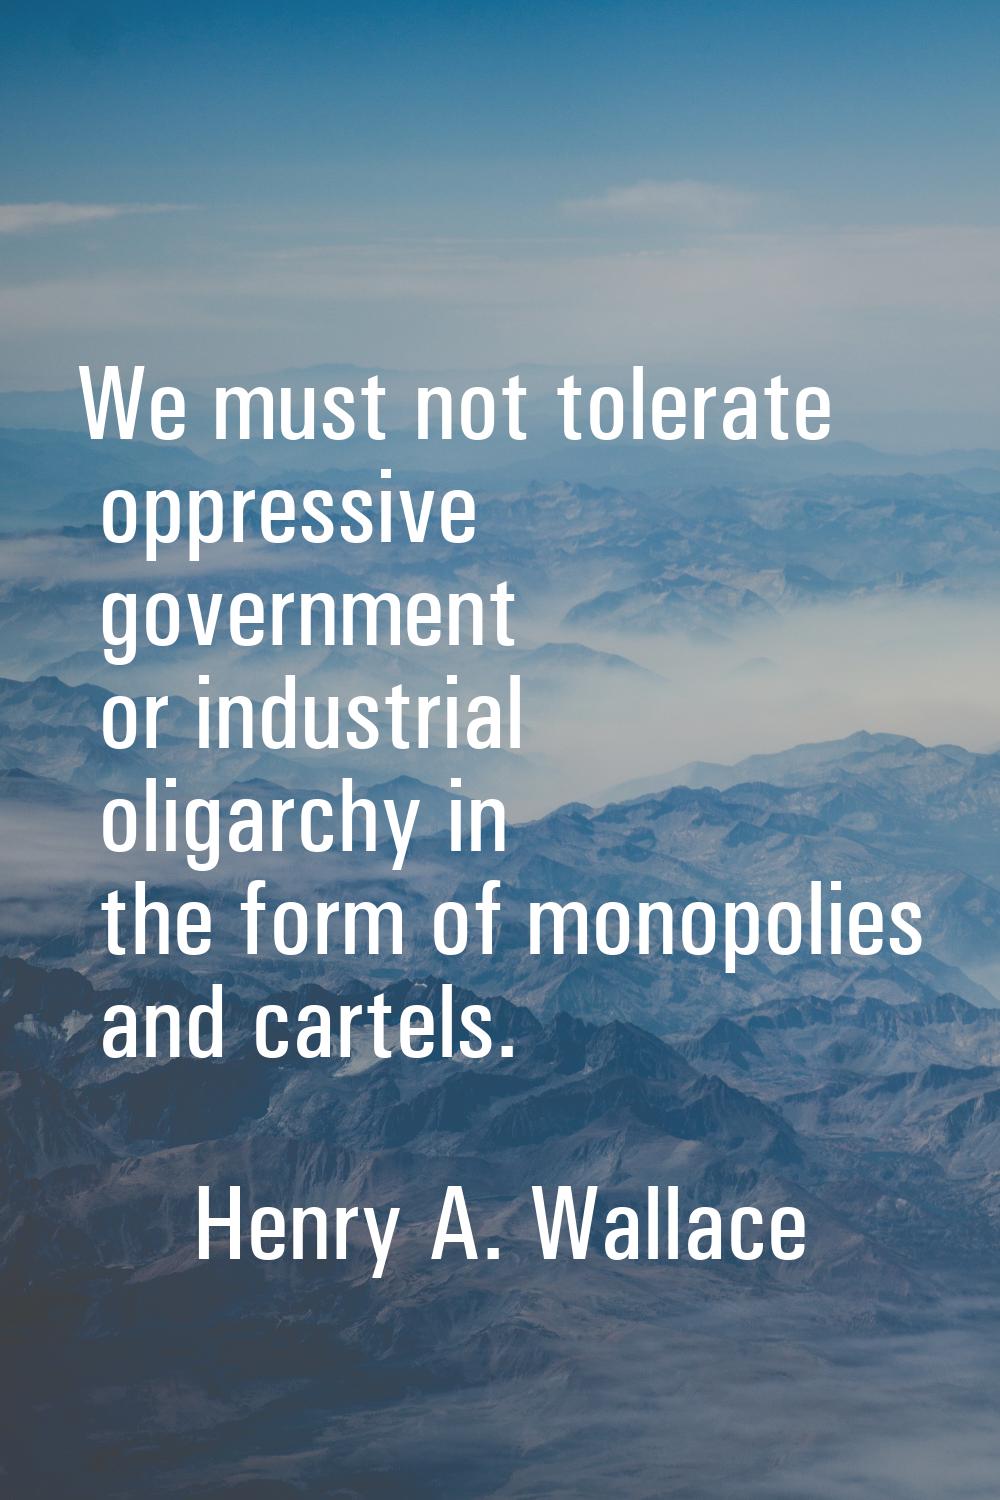 We must not tolerate oppressive government or industrial oligarchy in the form of monopolies and ca